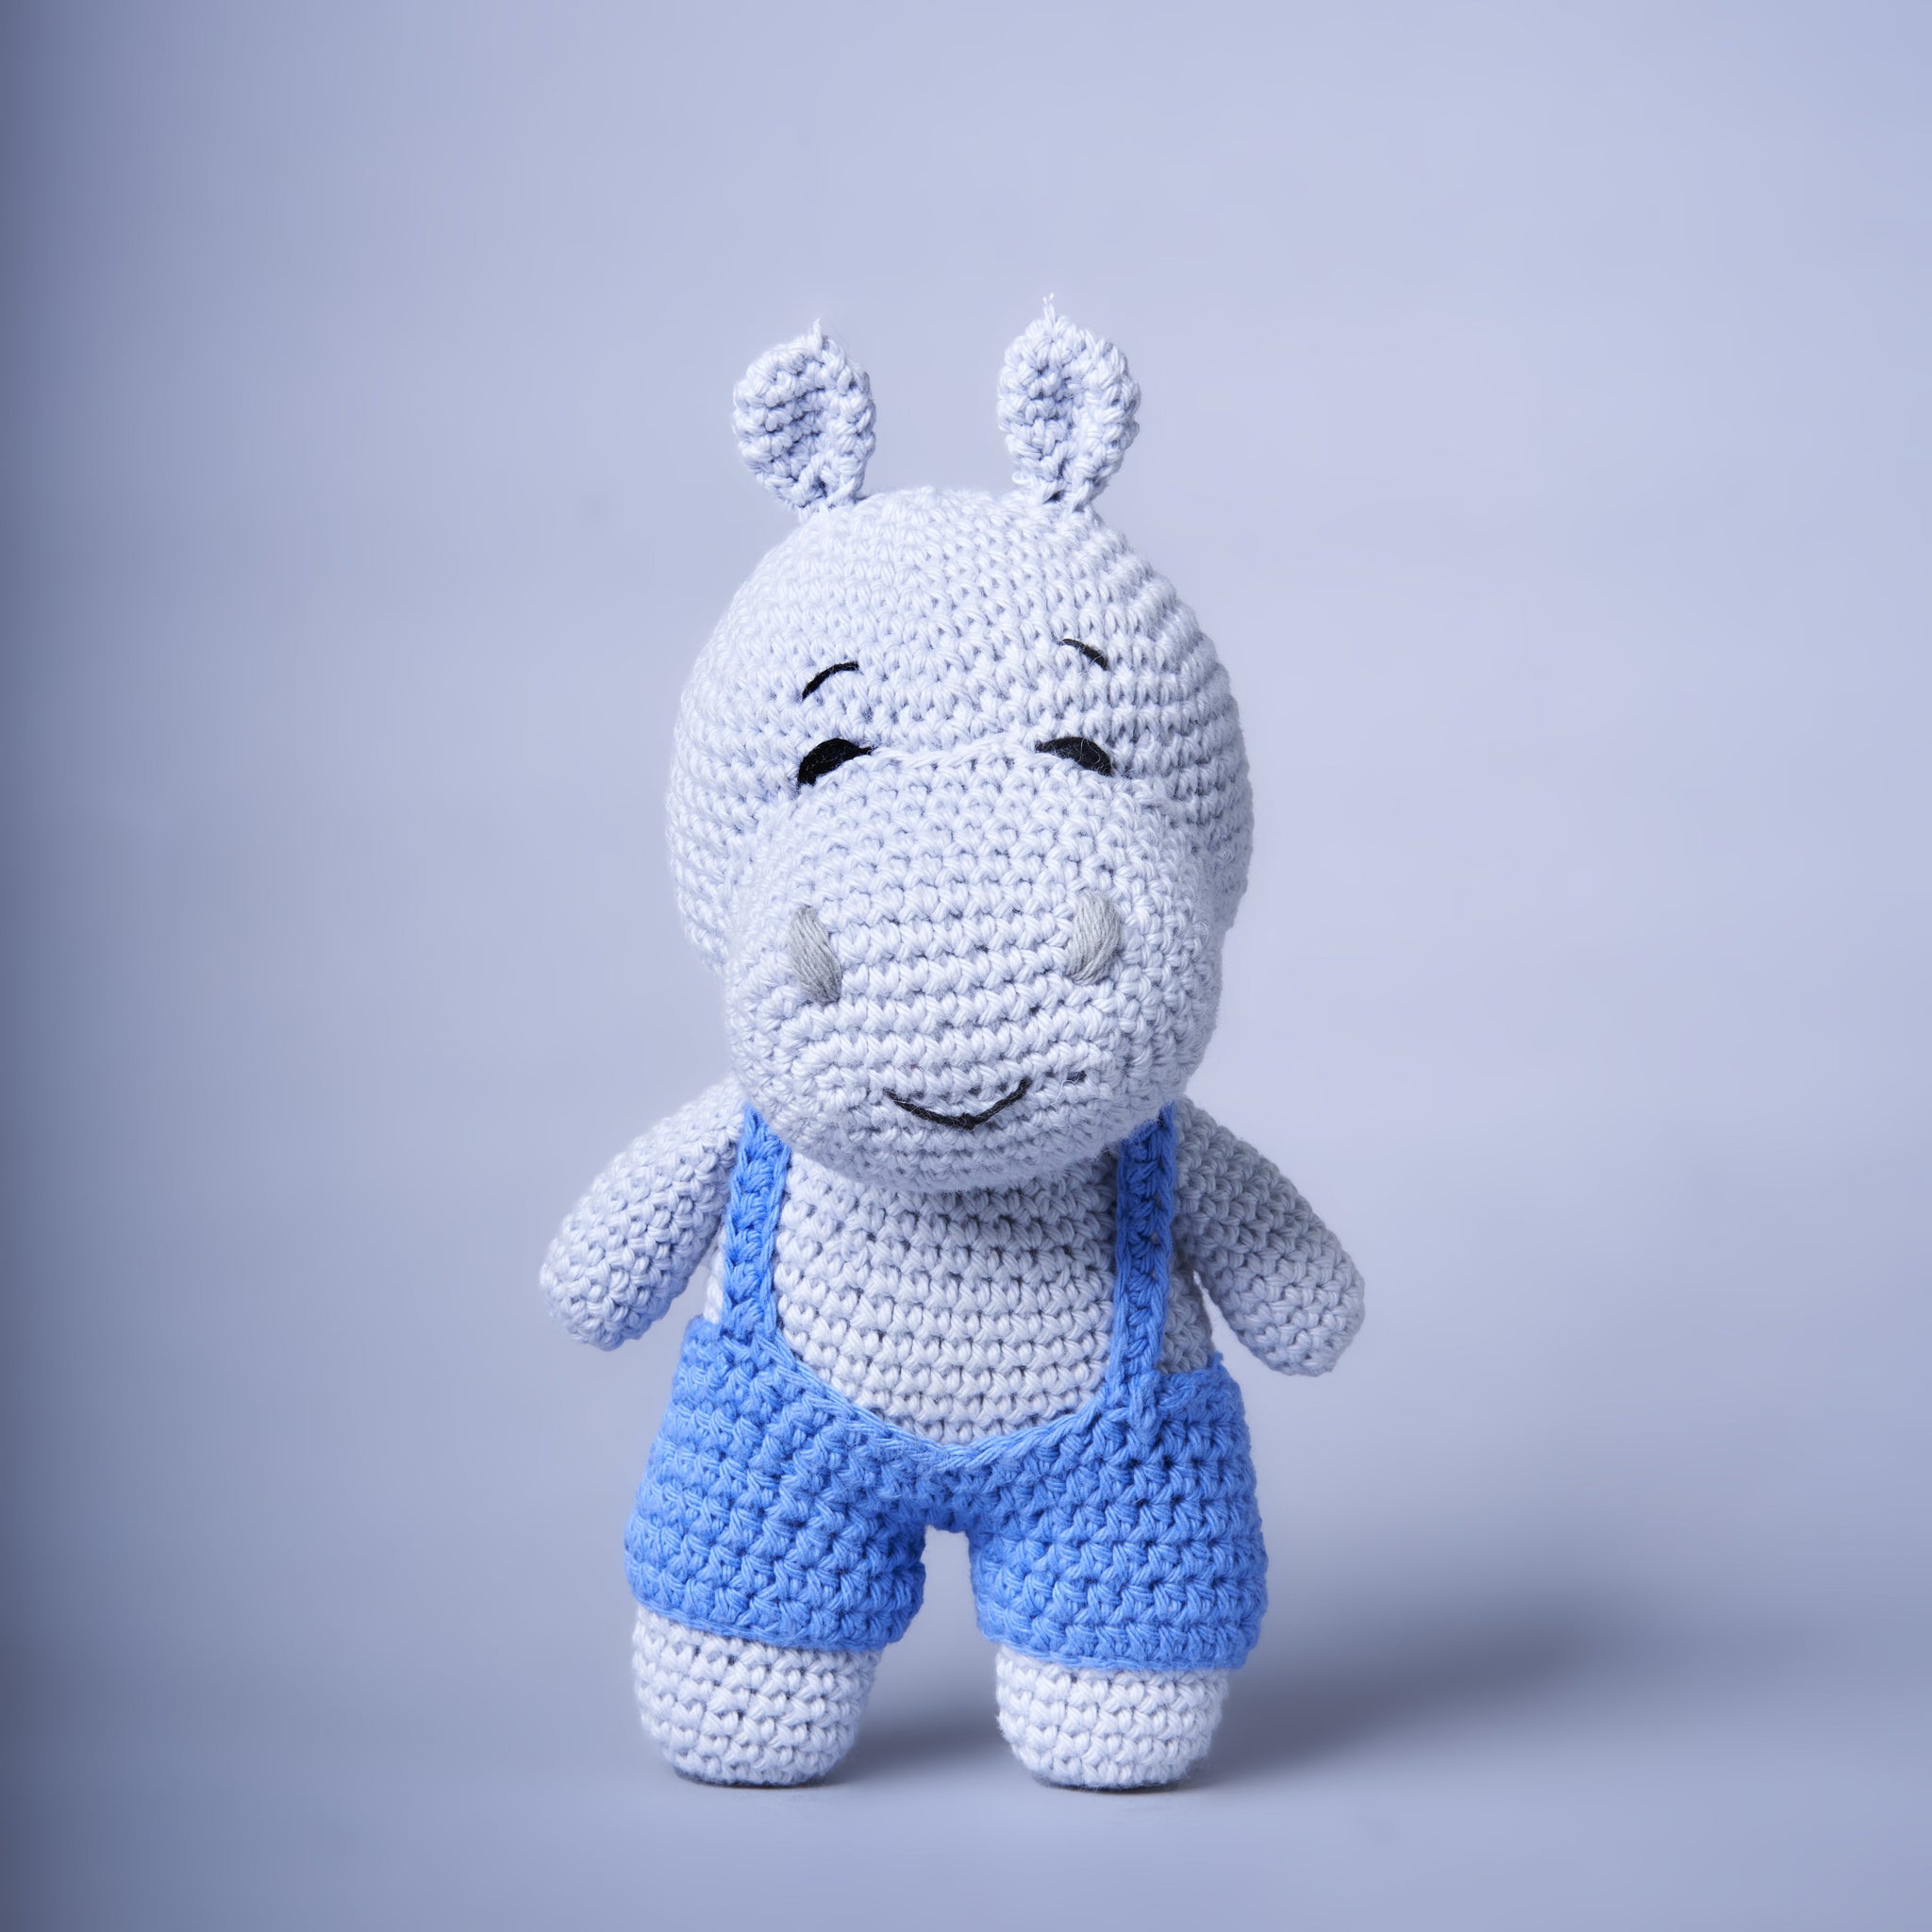 SUPER SOFT PERIOD PLUSHIES: HIPPO | HANDMADE STRESS RELIEVER TOYS